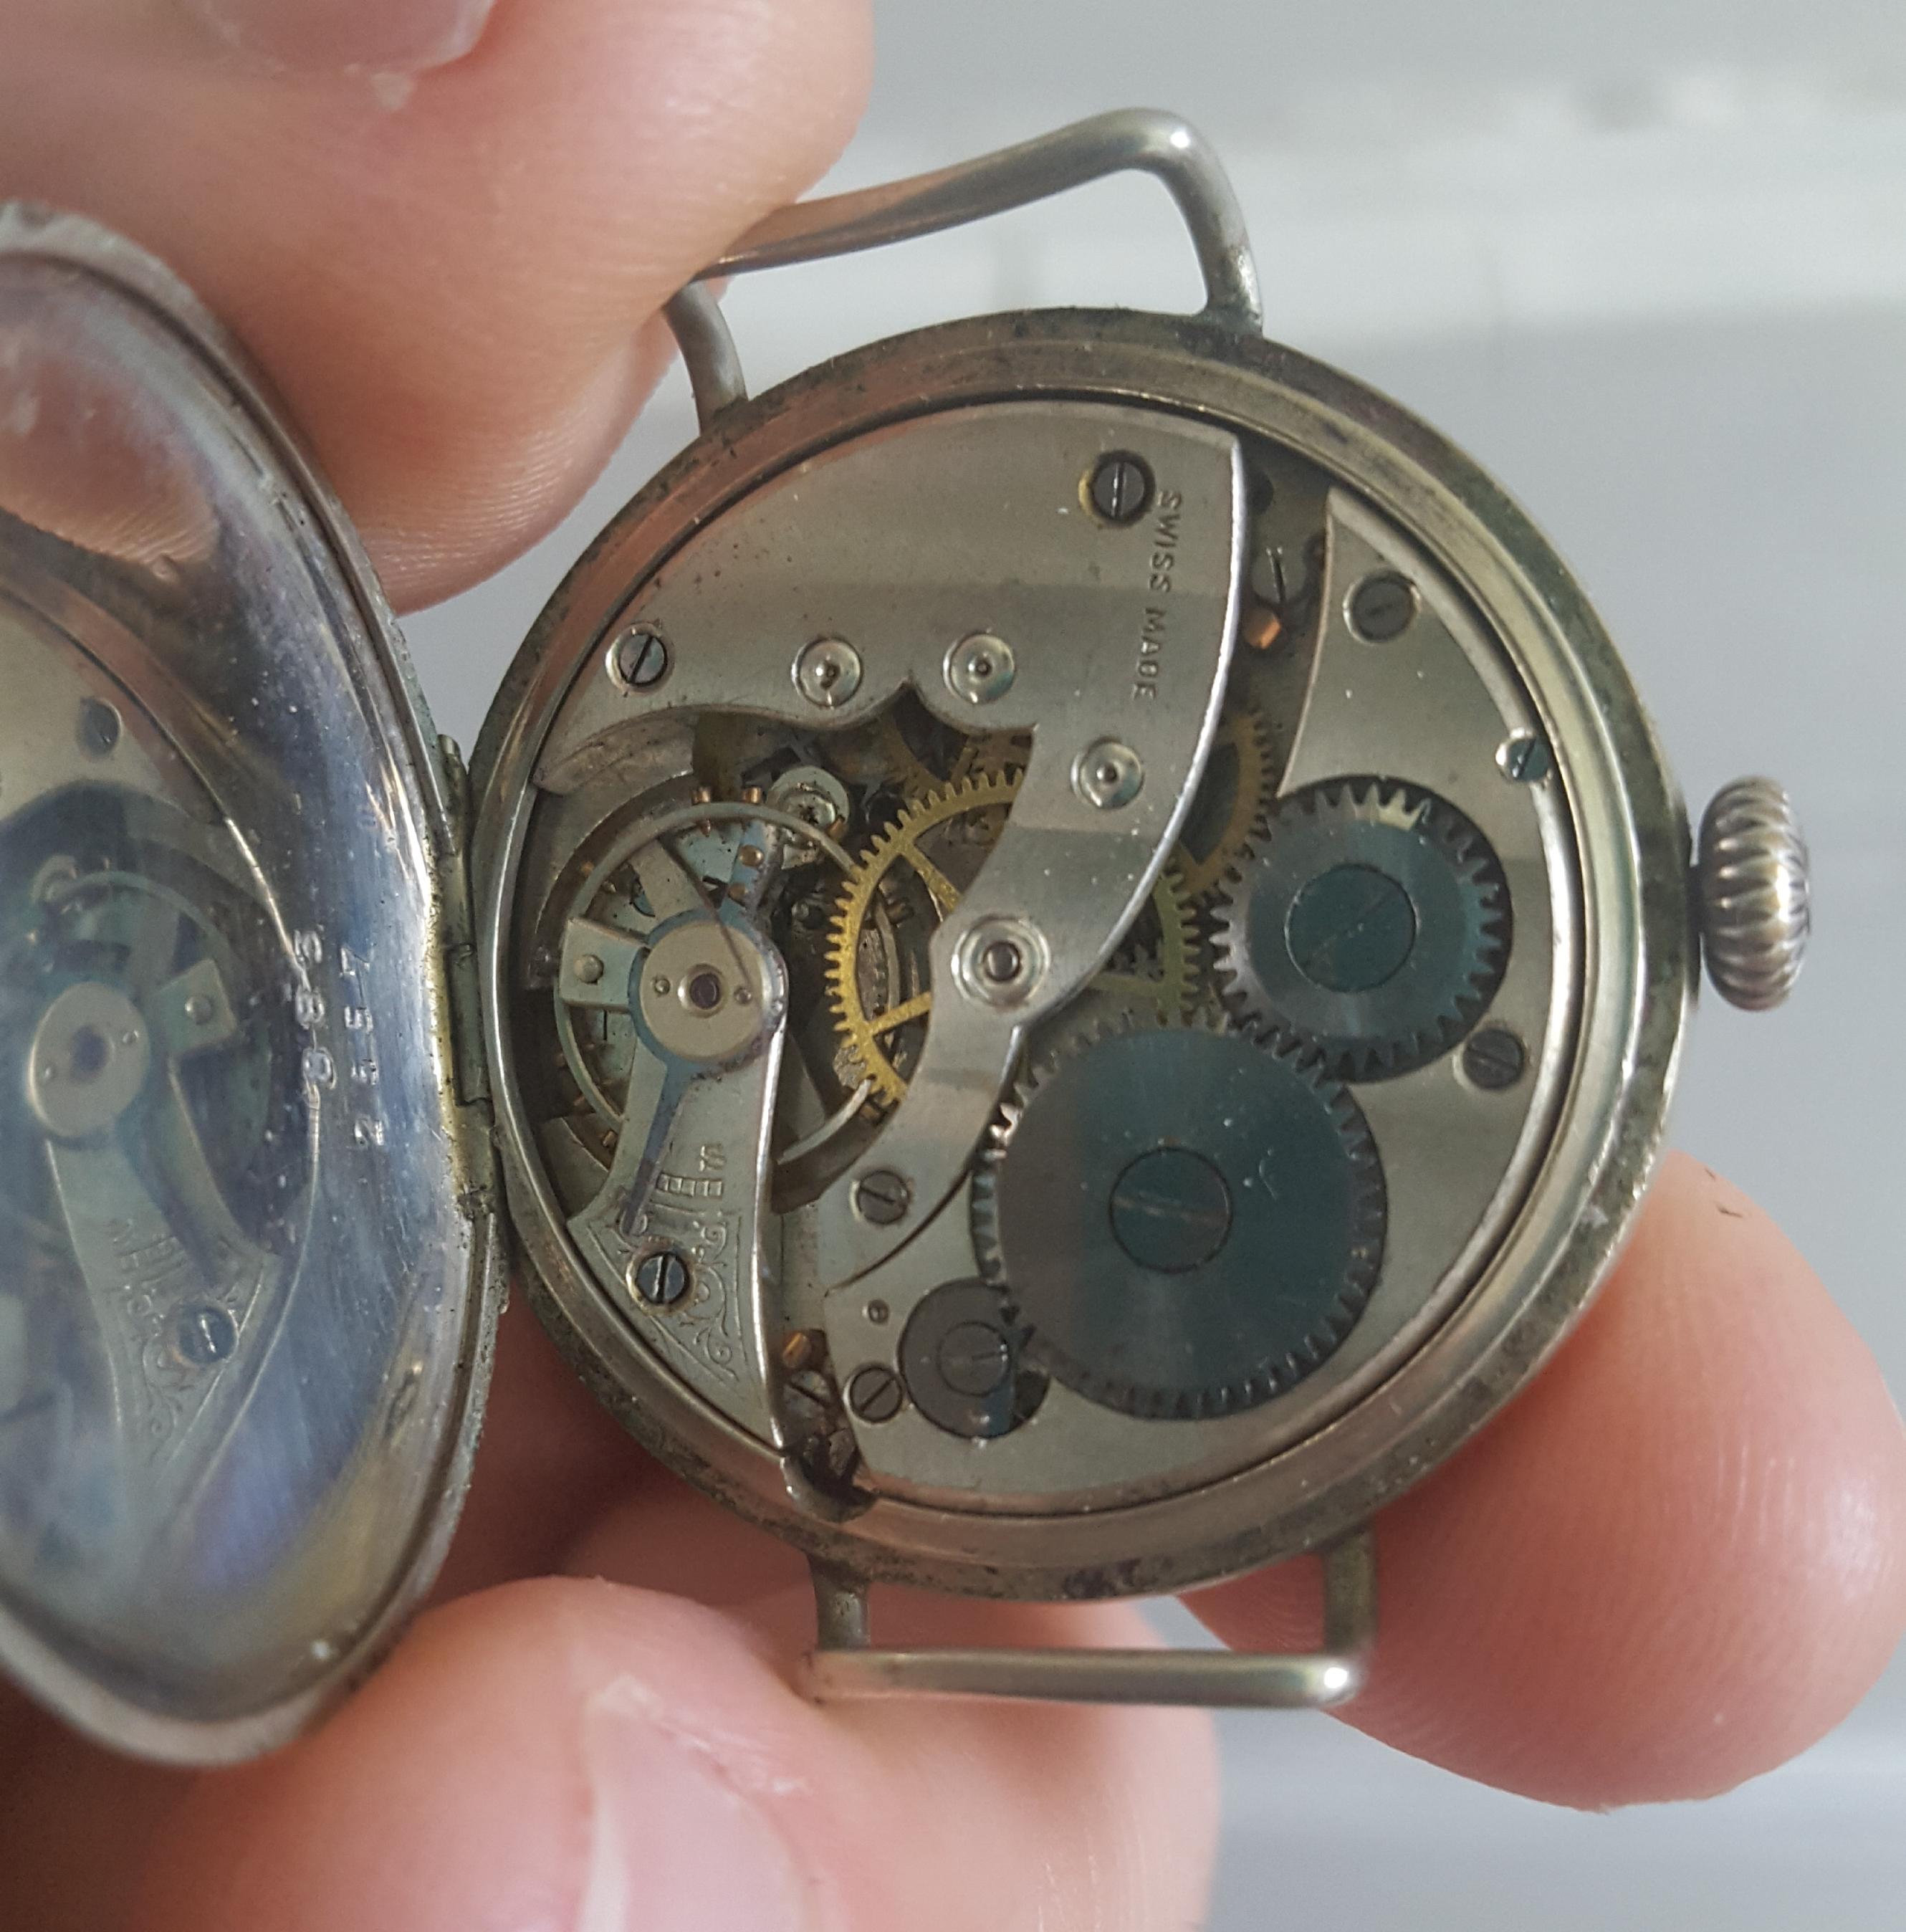 Trench watch movement identification - Watch Repairs Help & Advice ...